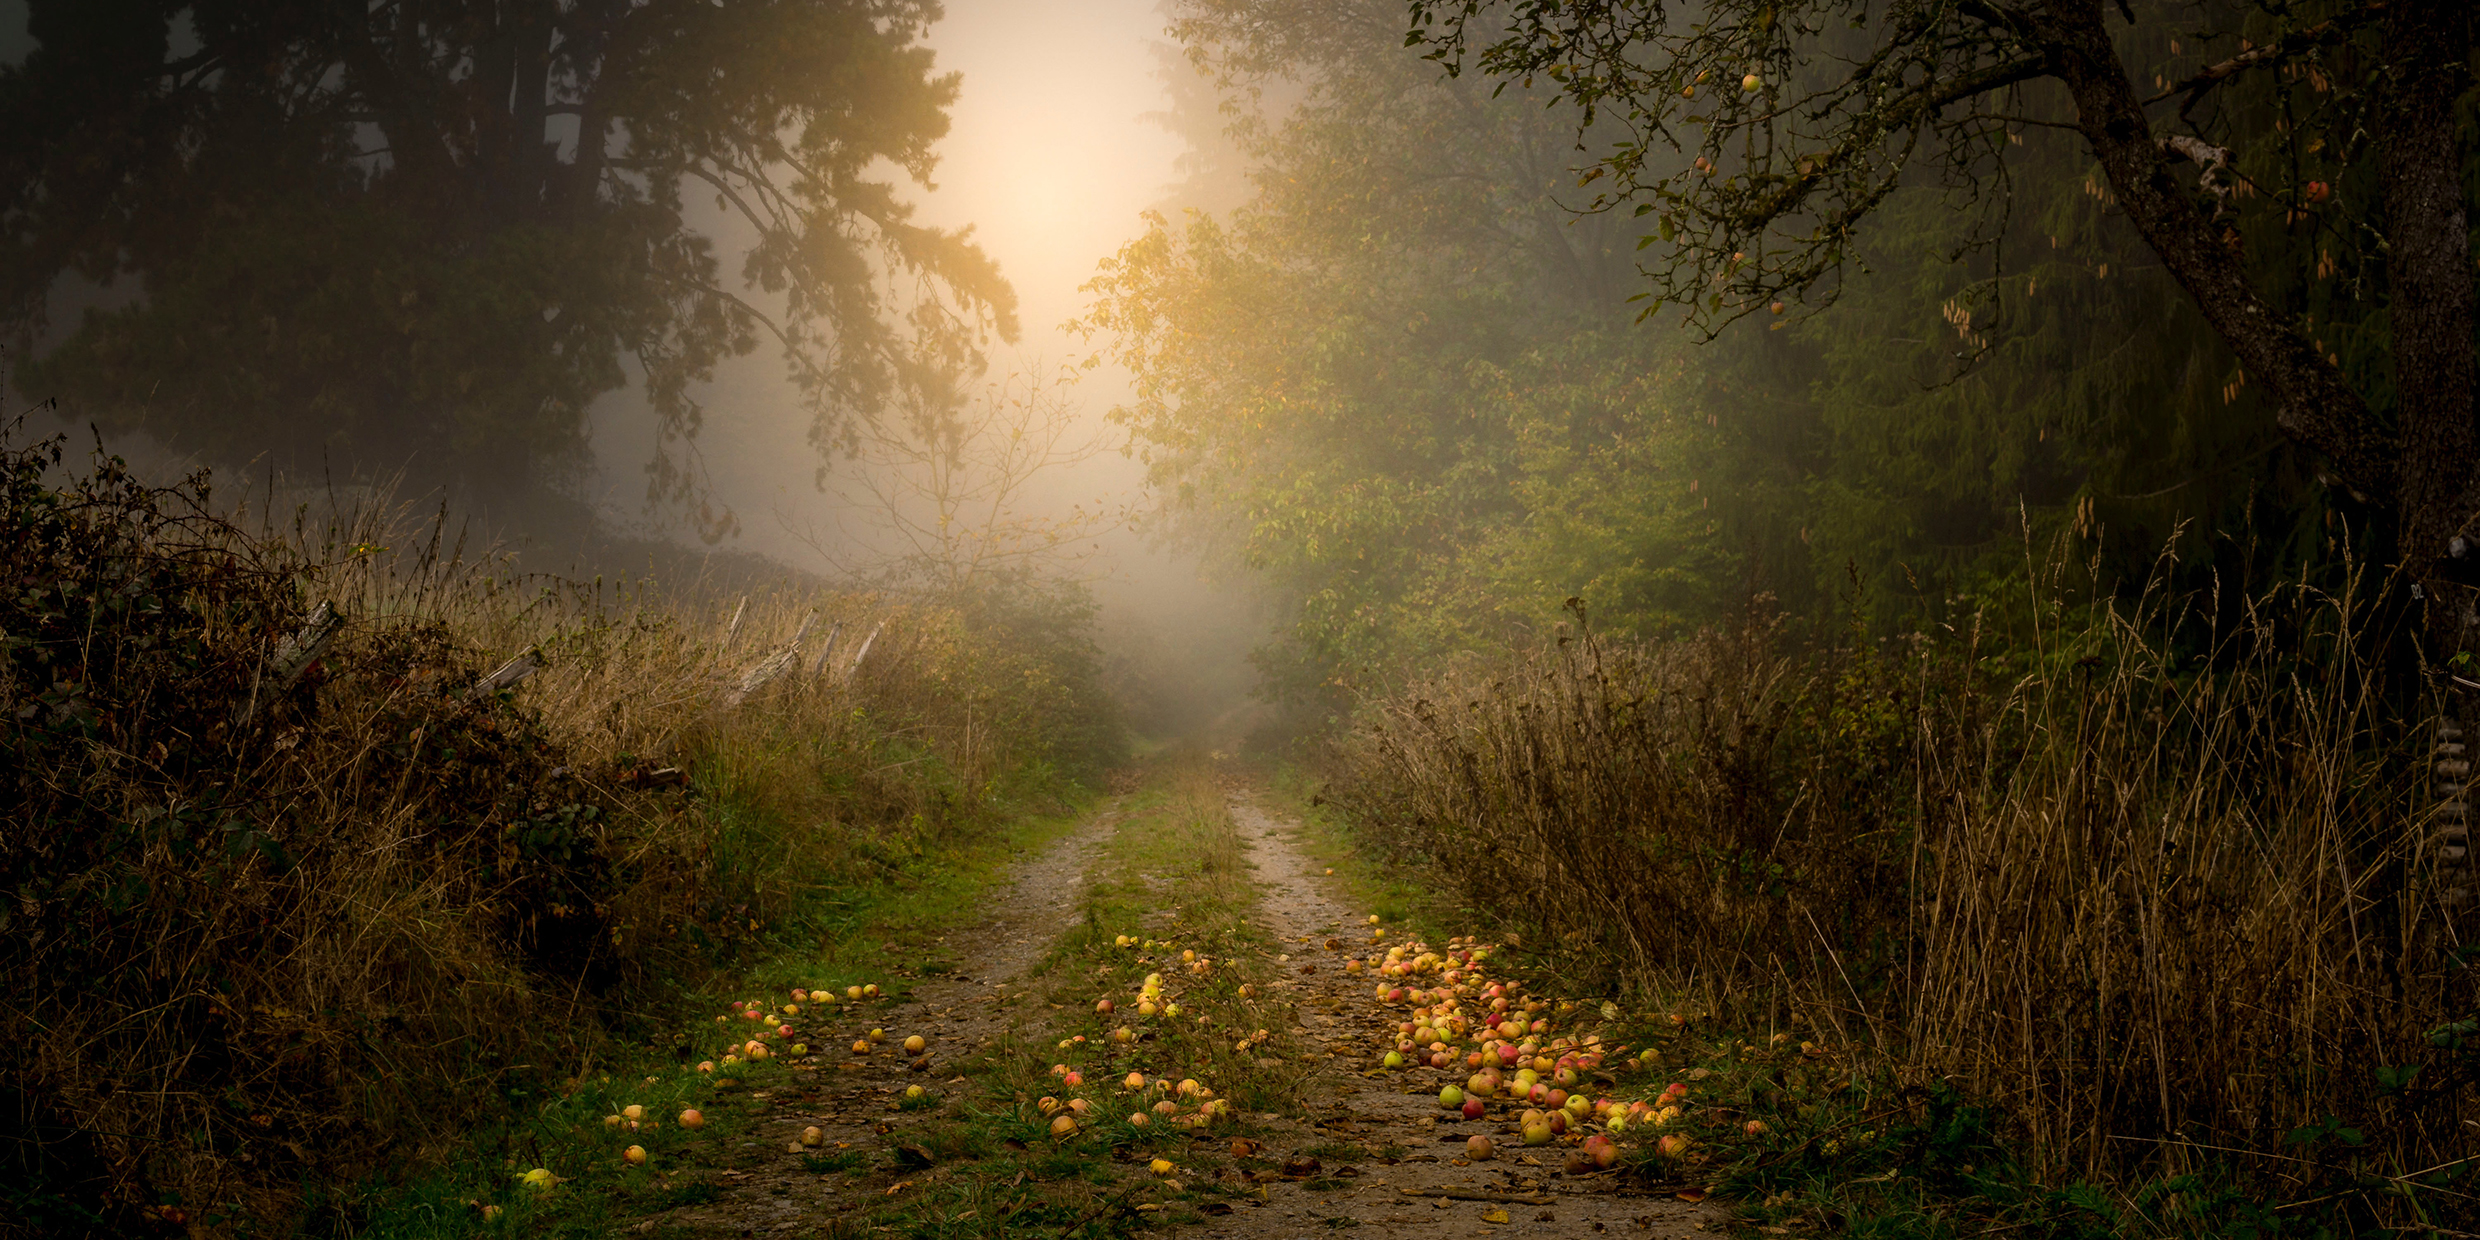 Image of a misty path in the woods